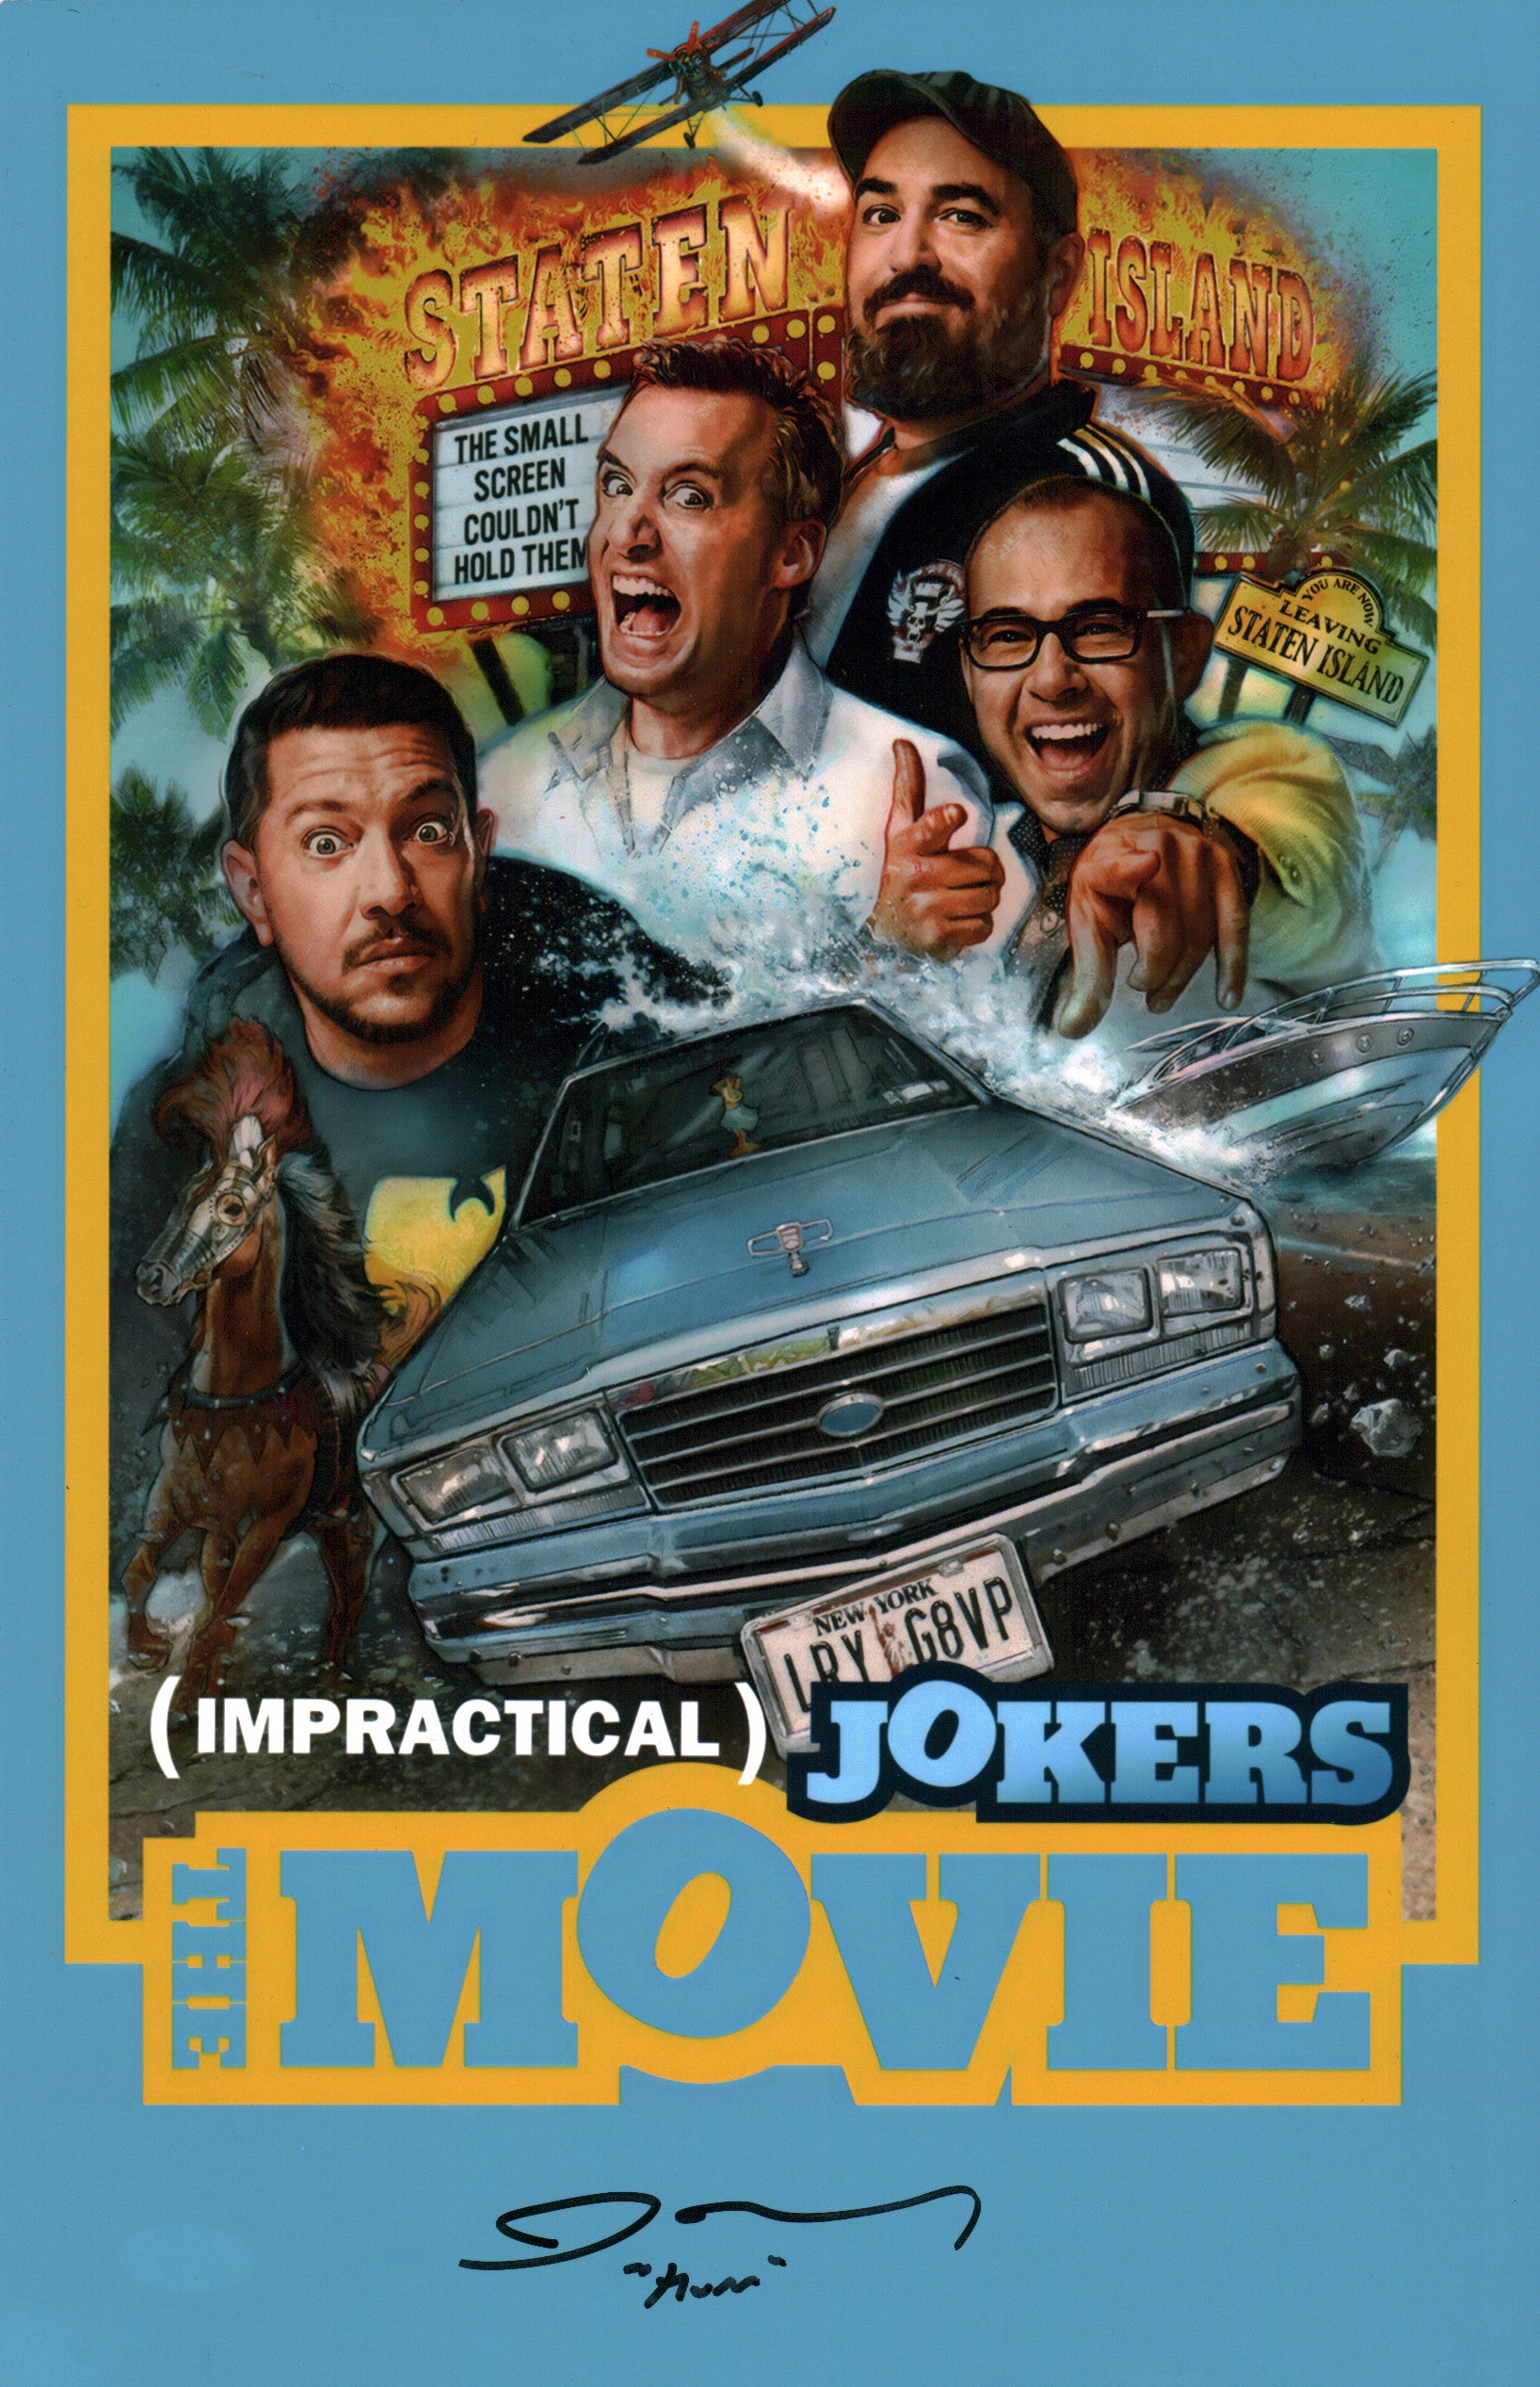 James Murray Impractical Jokers The Movie 11x17 Photo Poster Signed JSA Certified Autograph